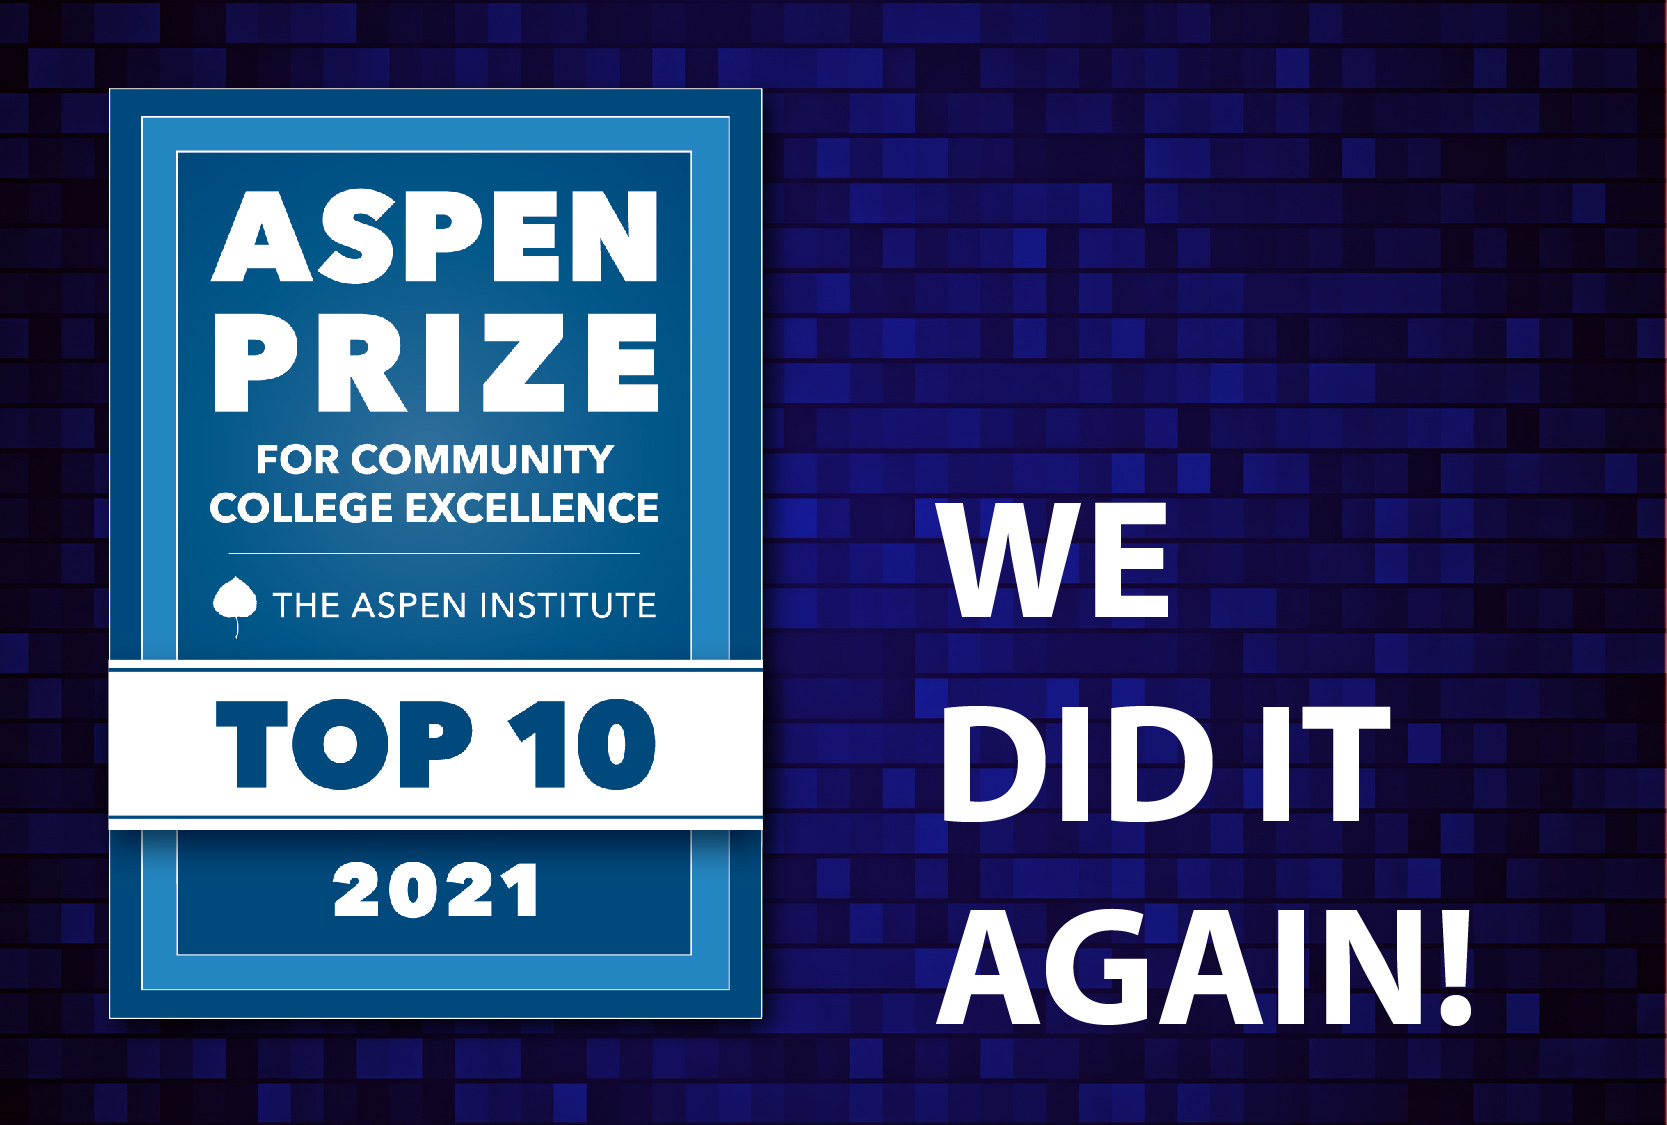 2021 Aspen Prize for Community College Excellence Top 10 logo